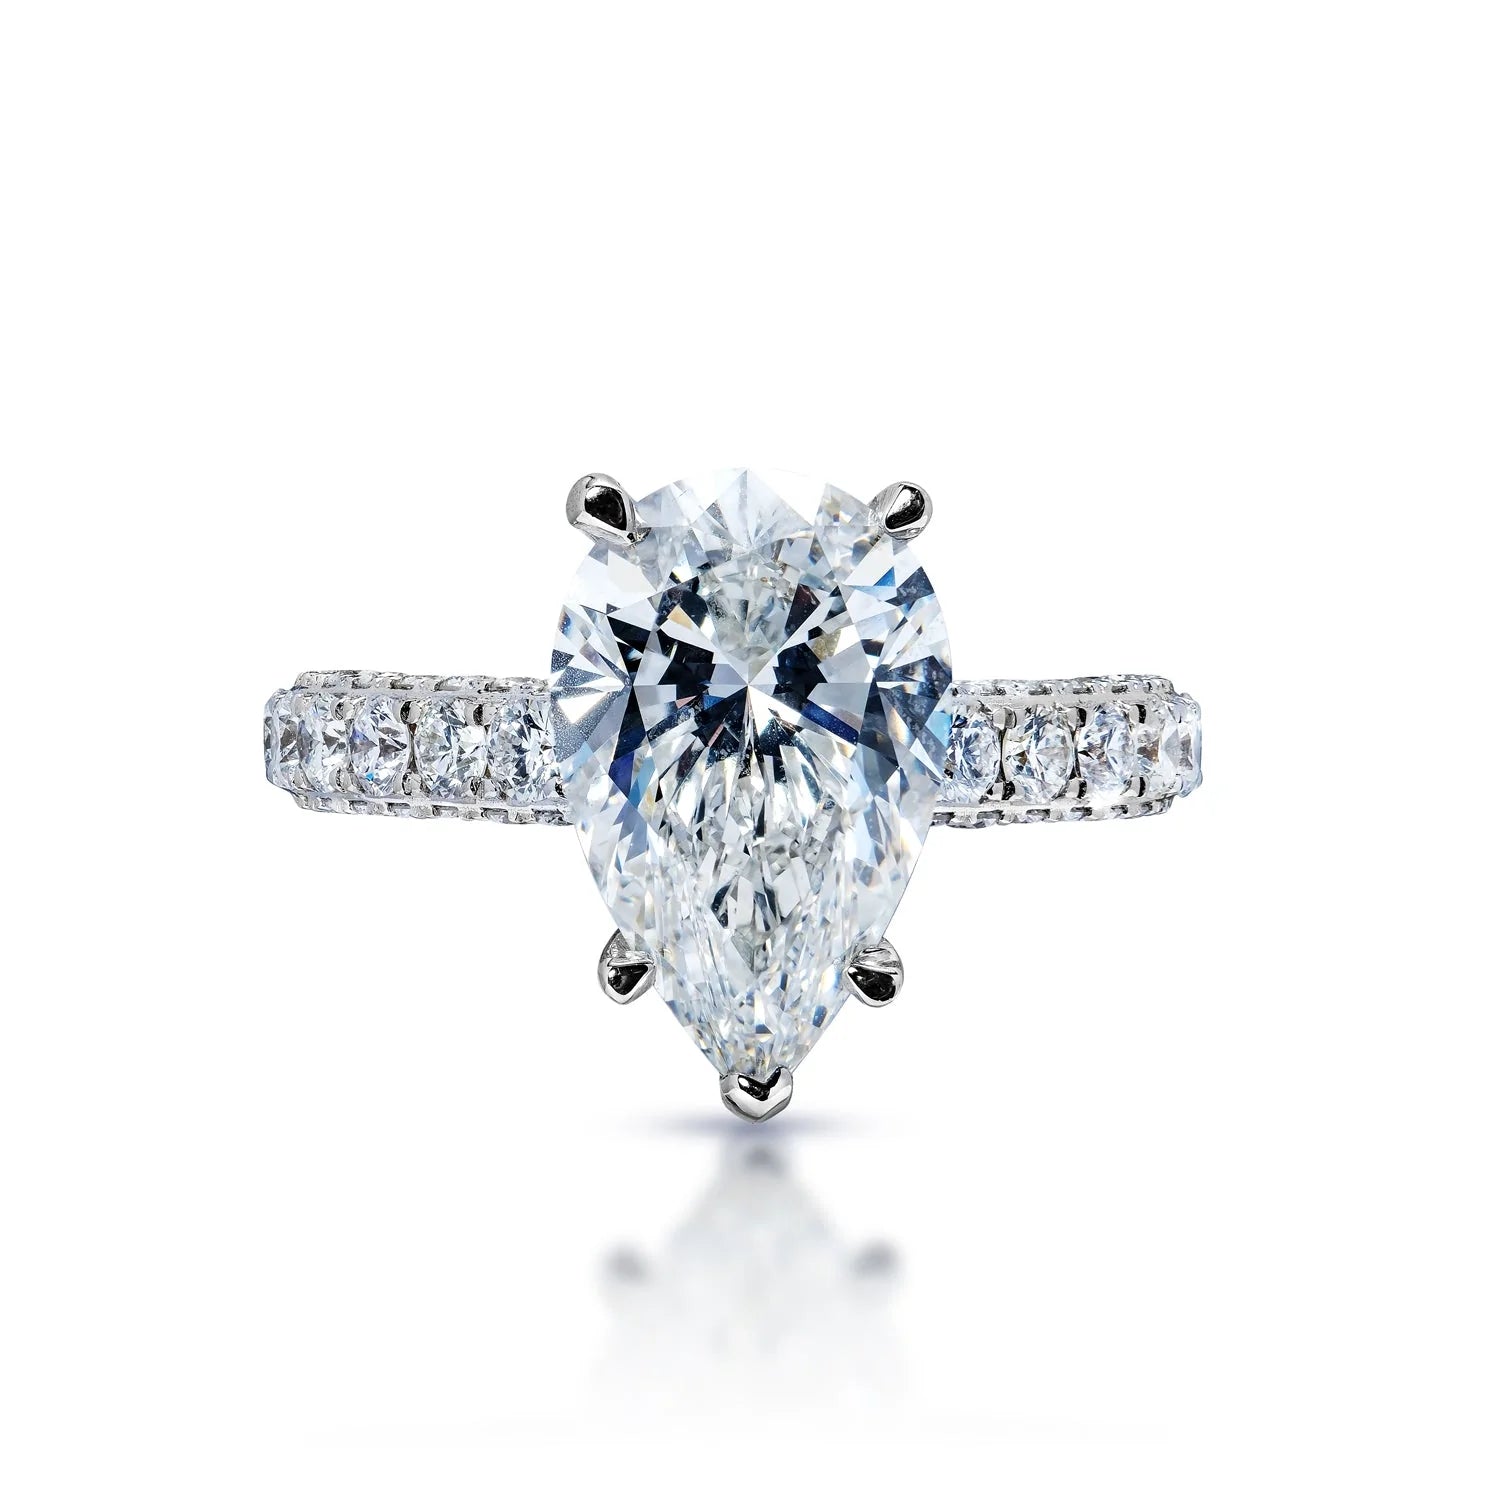 Lillie 6 Carat F VS1 Pear Shape Lab Grown Diamond Engagement Ring in 18K White Gold Front View